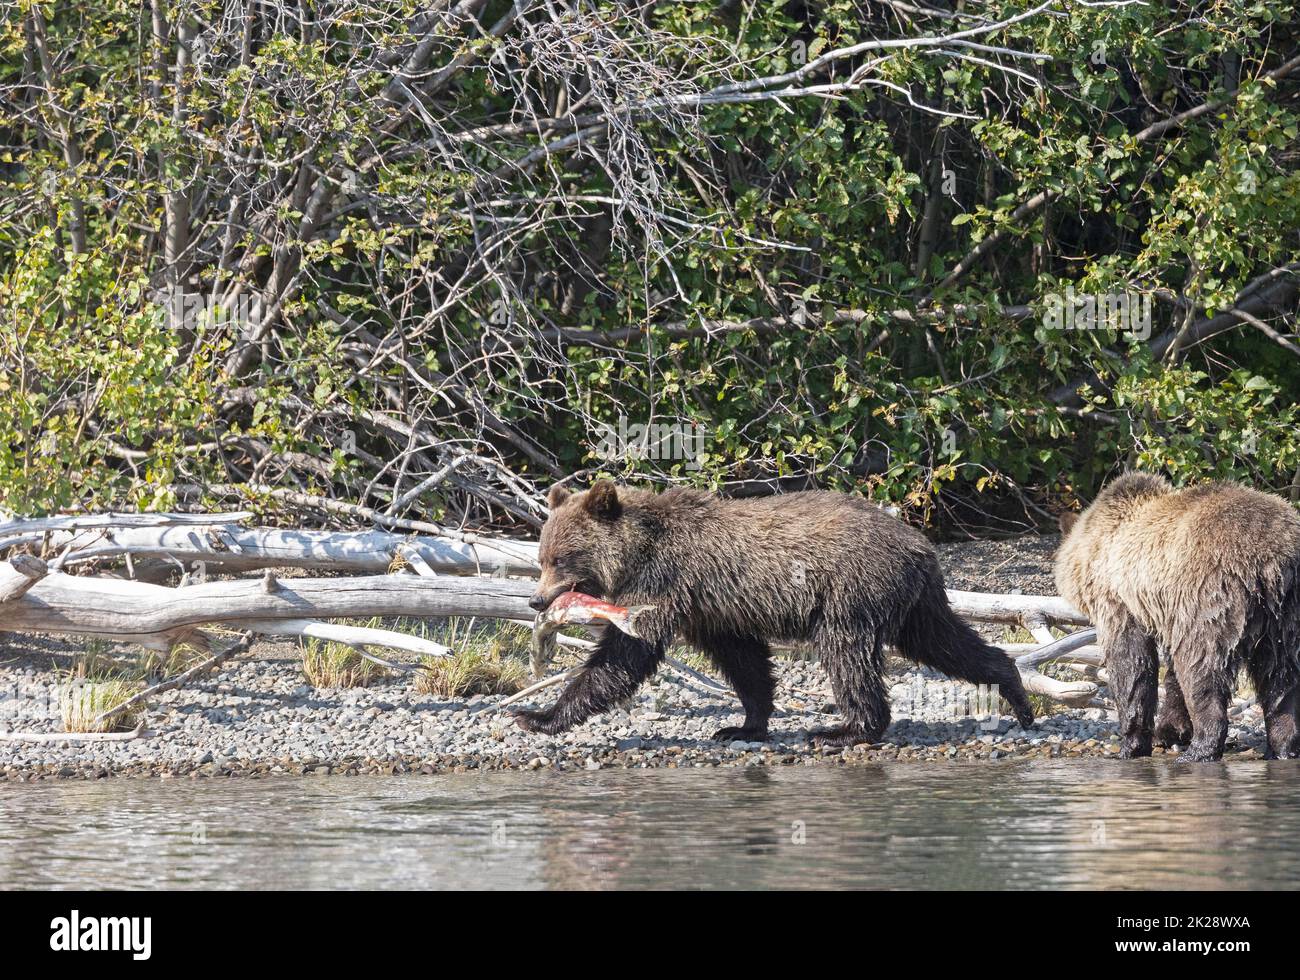 Grizzly Cub with Salmon Running from Sibling Stock Photo